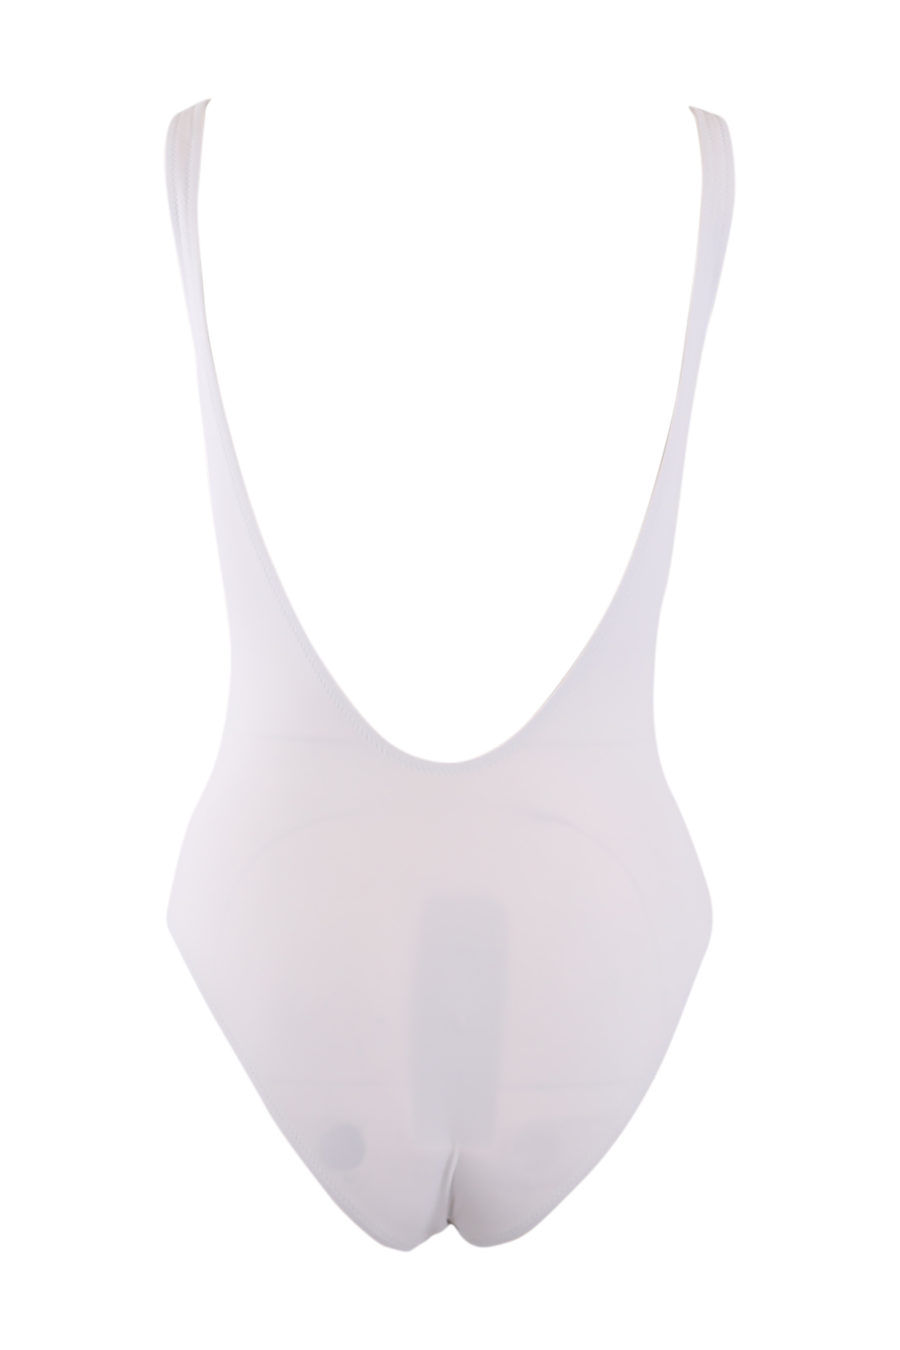 White one-piece swimming costume with large black logo - IMG 9067